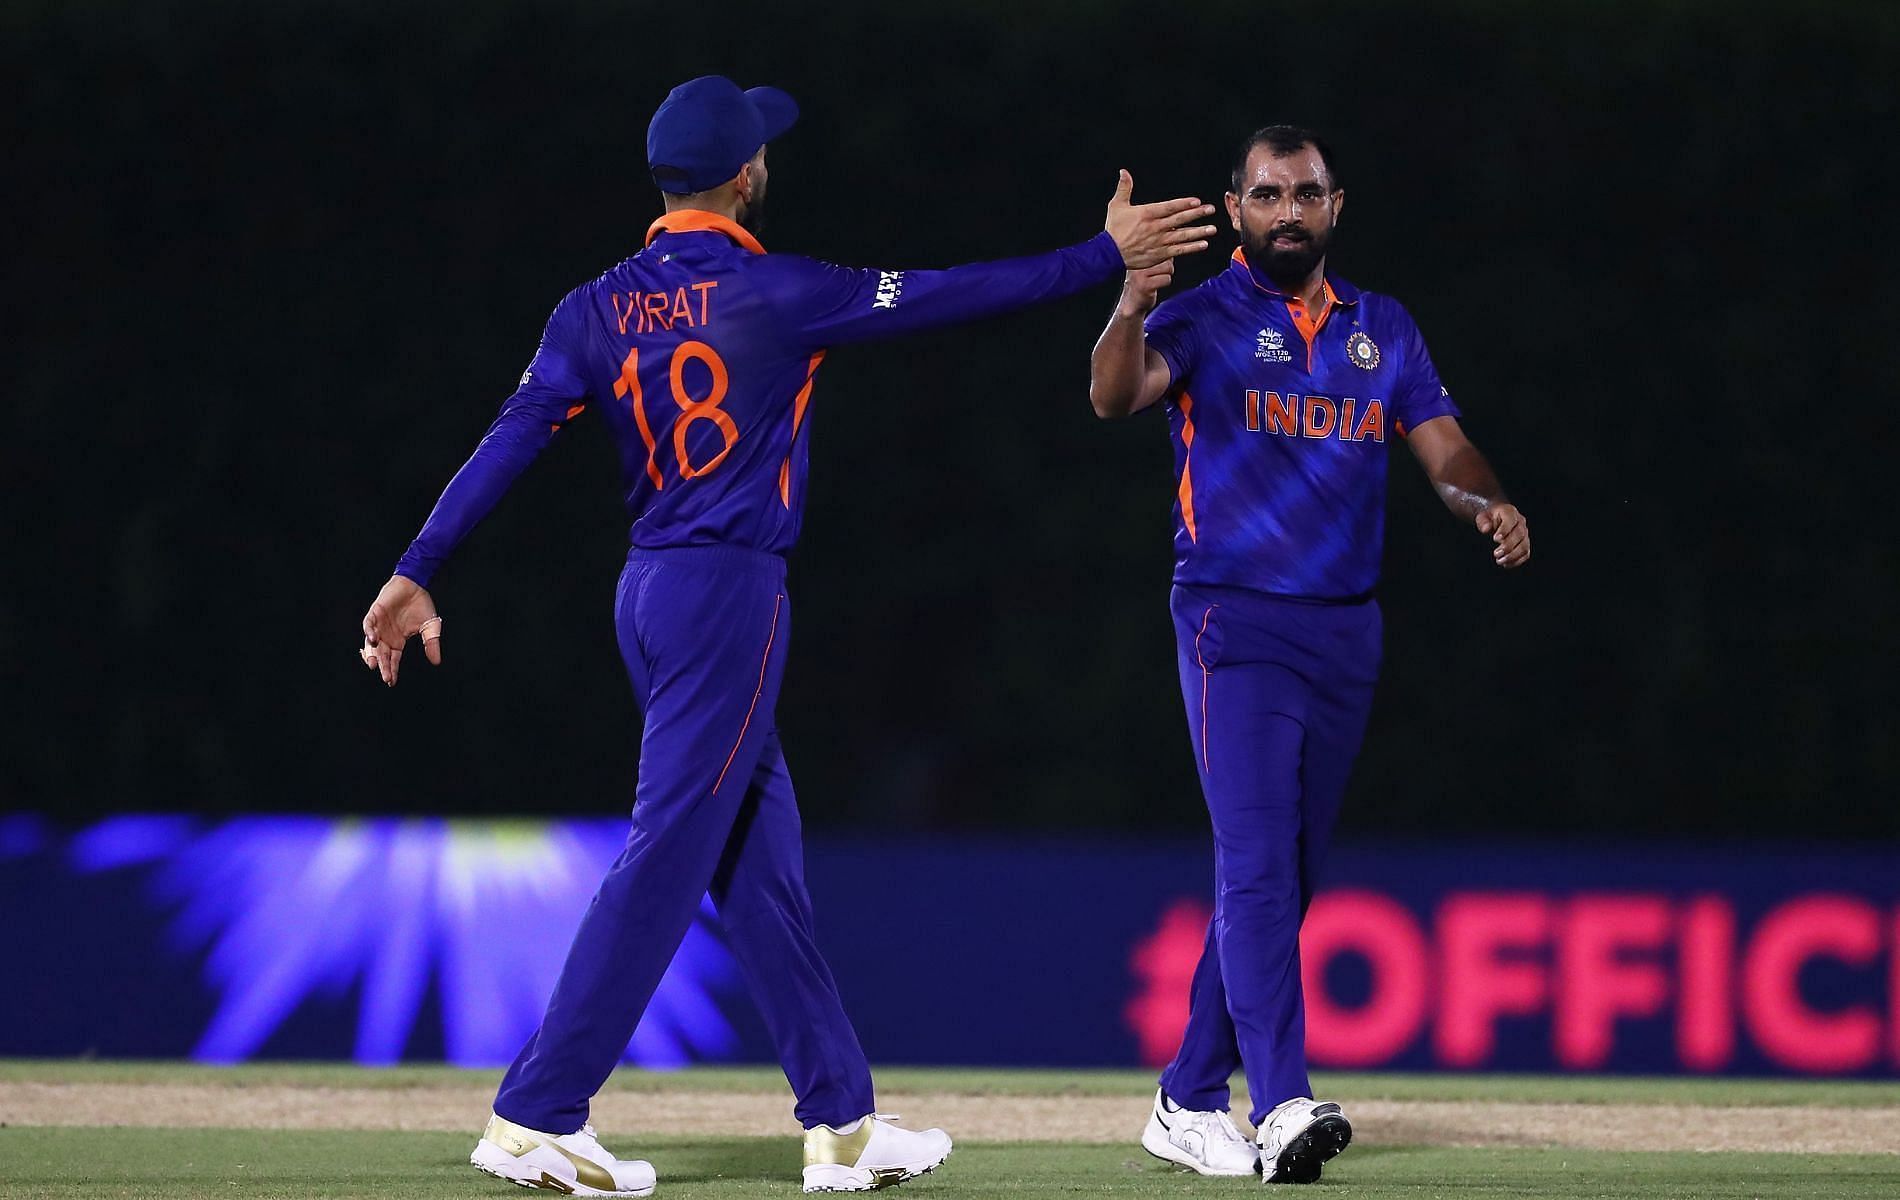 Mohammed Shami will look to end the T20 World Cup on a good note